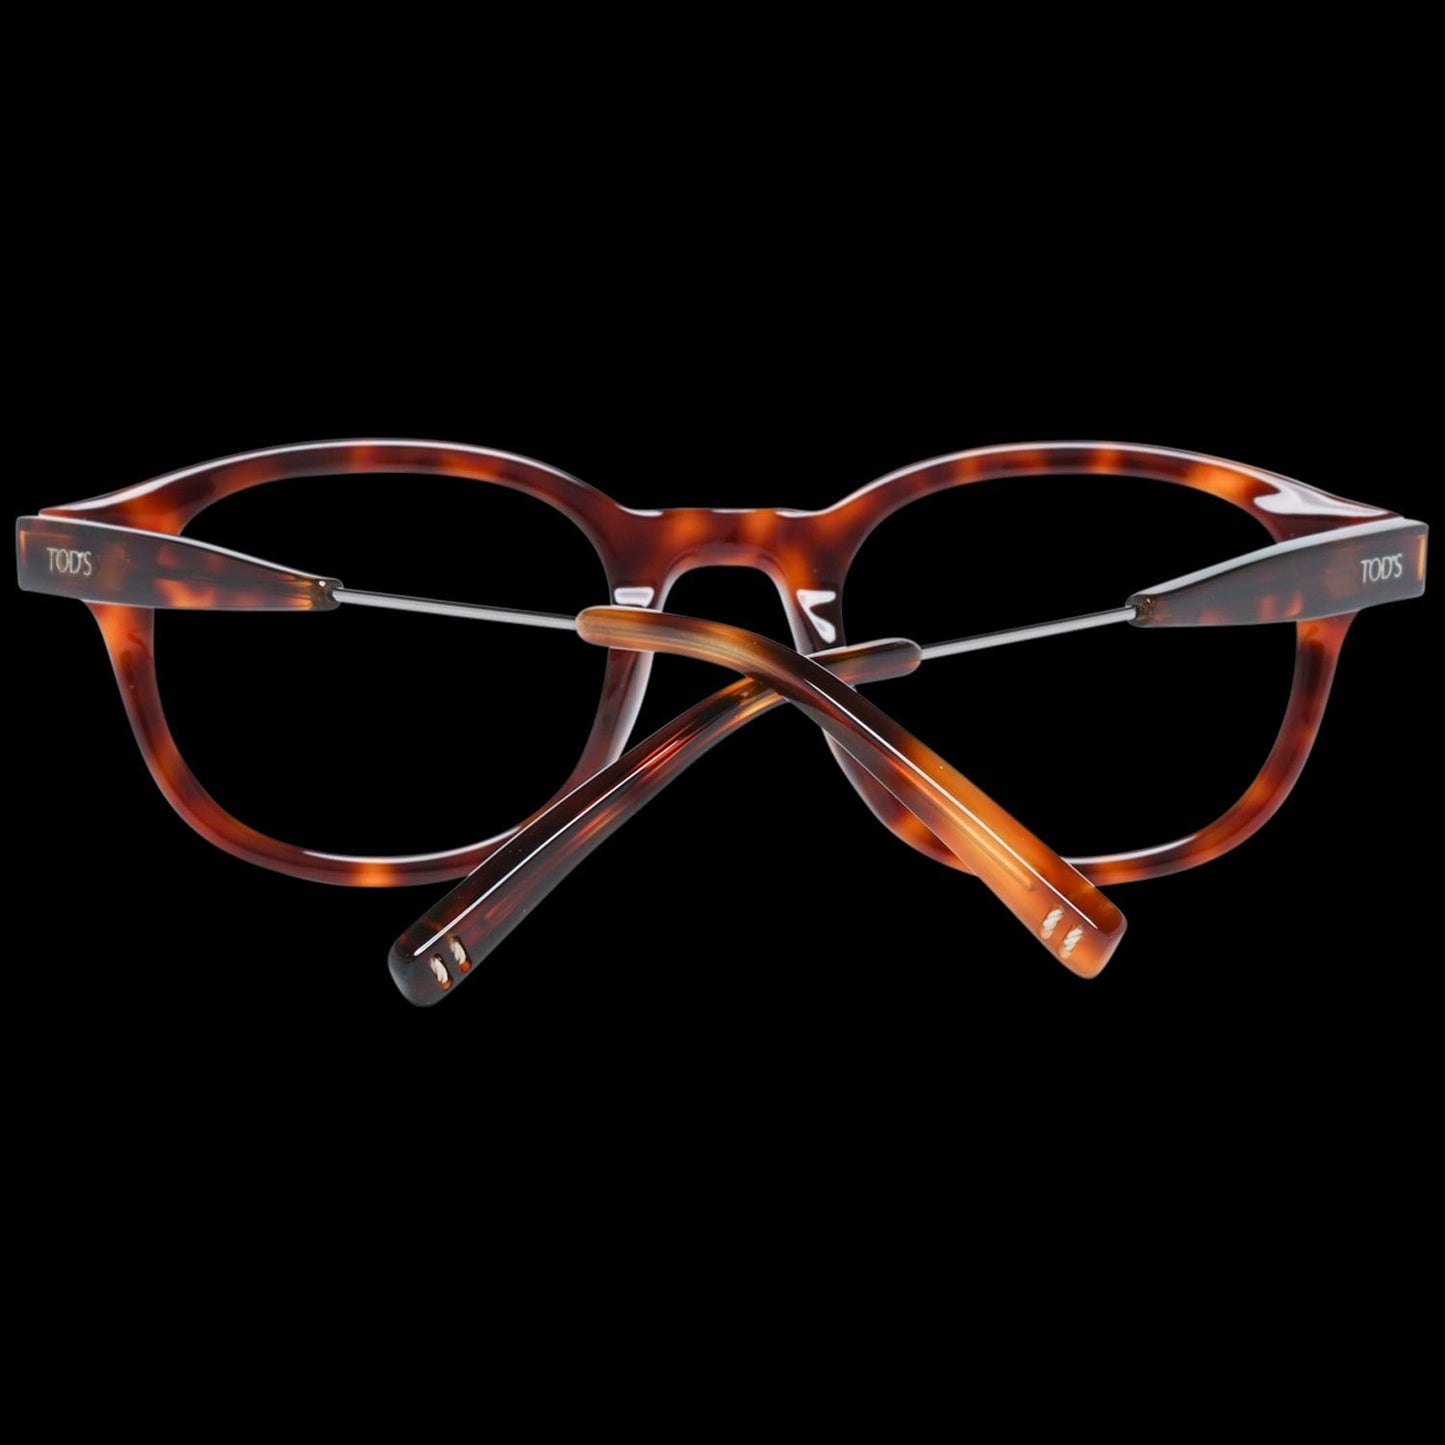 TODS FRAME TODS MOD. TO5196 48054 SUNGLASSES & EYEWEAR tods-mod-to5196-48054